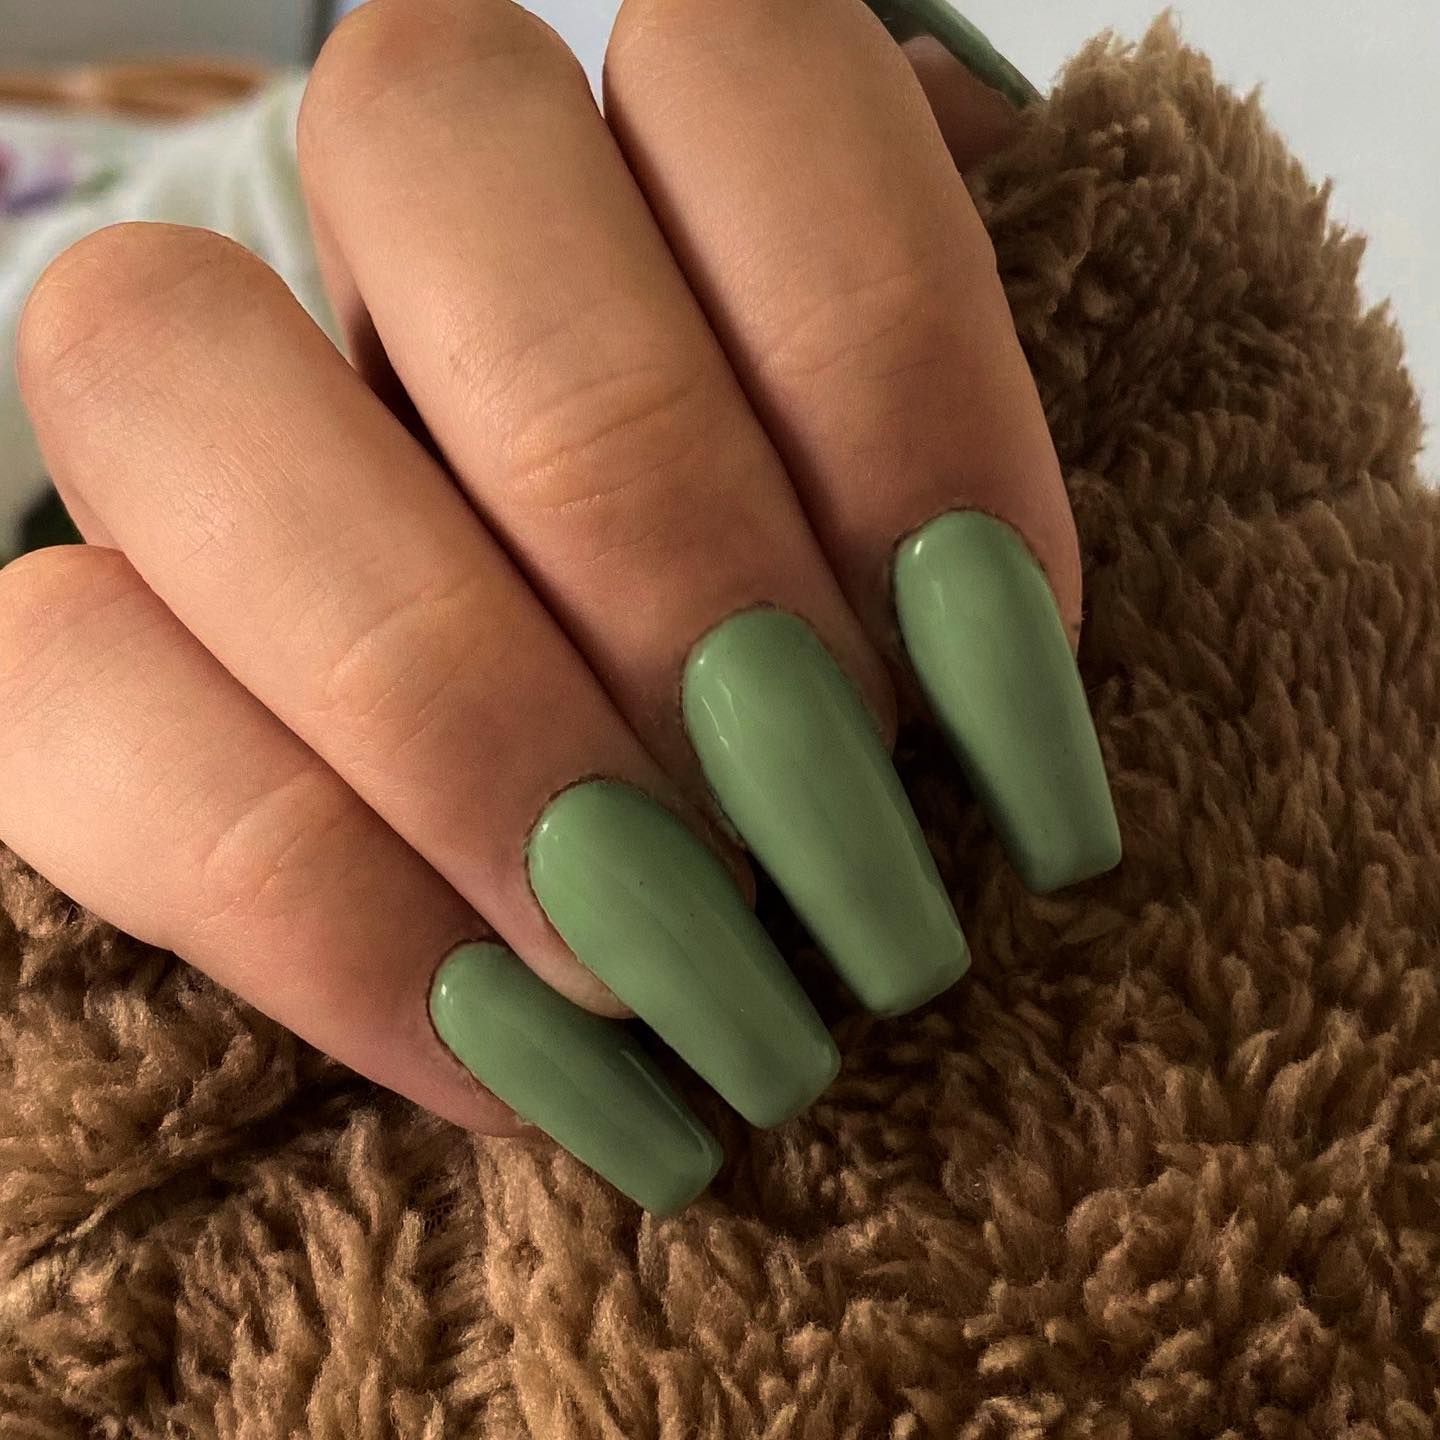 This shade of green looks more like an army green. Classy and chic look can be achieved with these pastel nails.